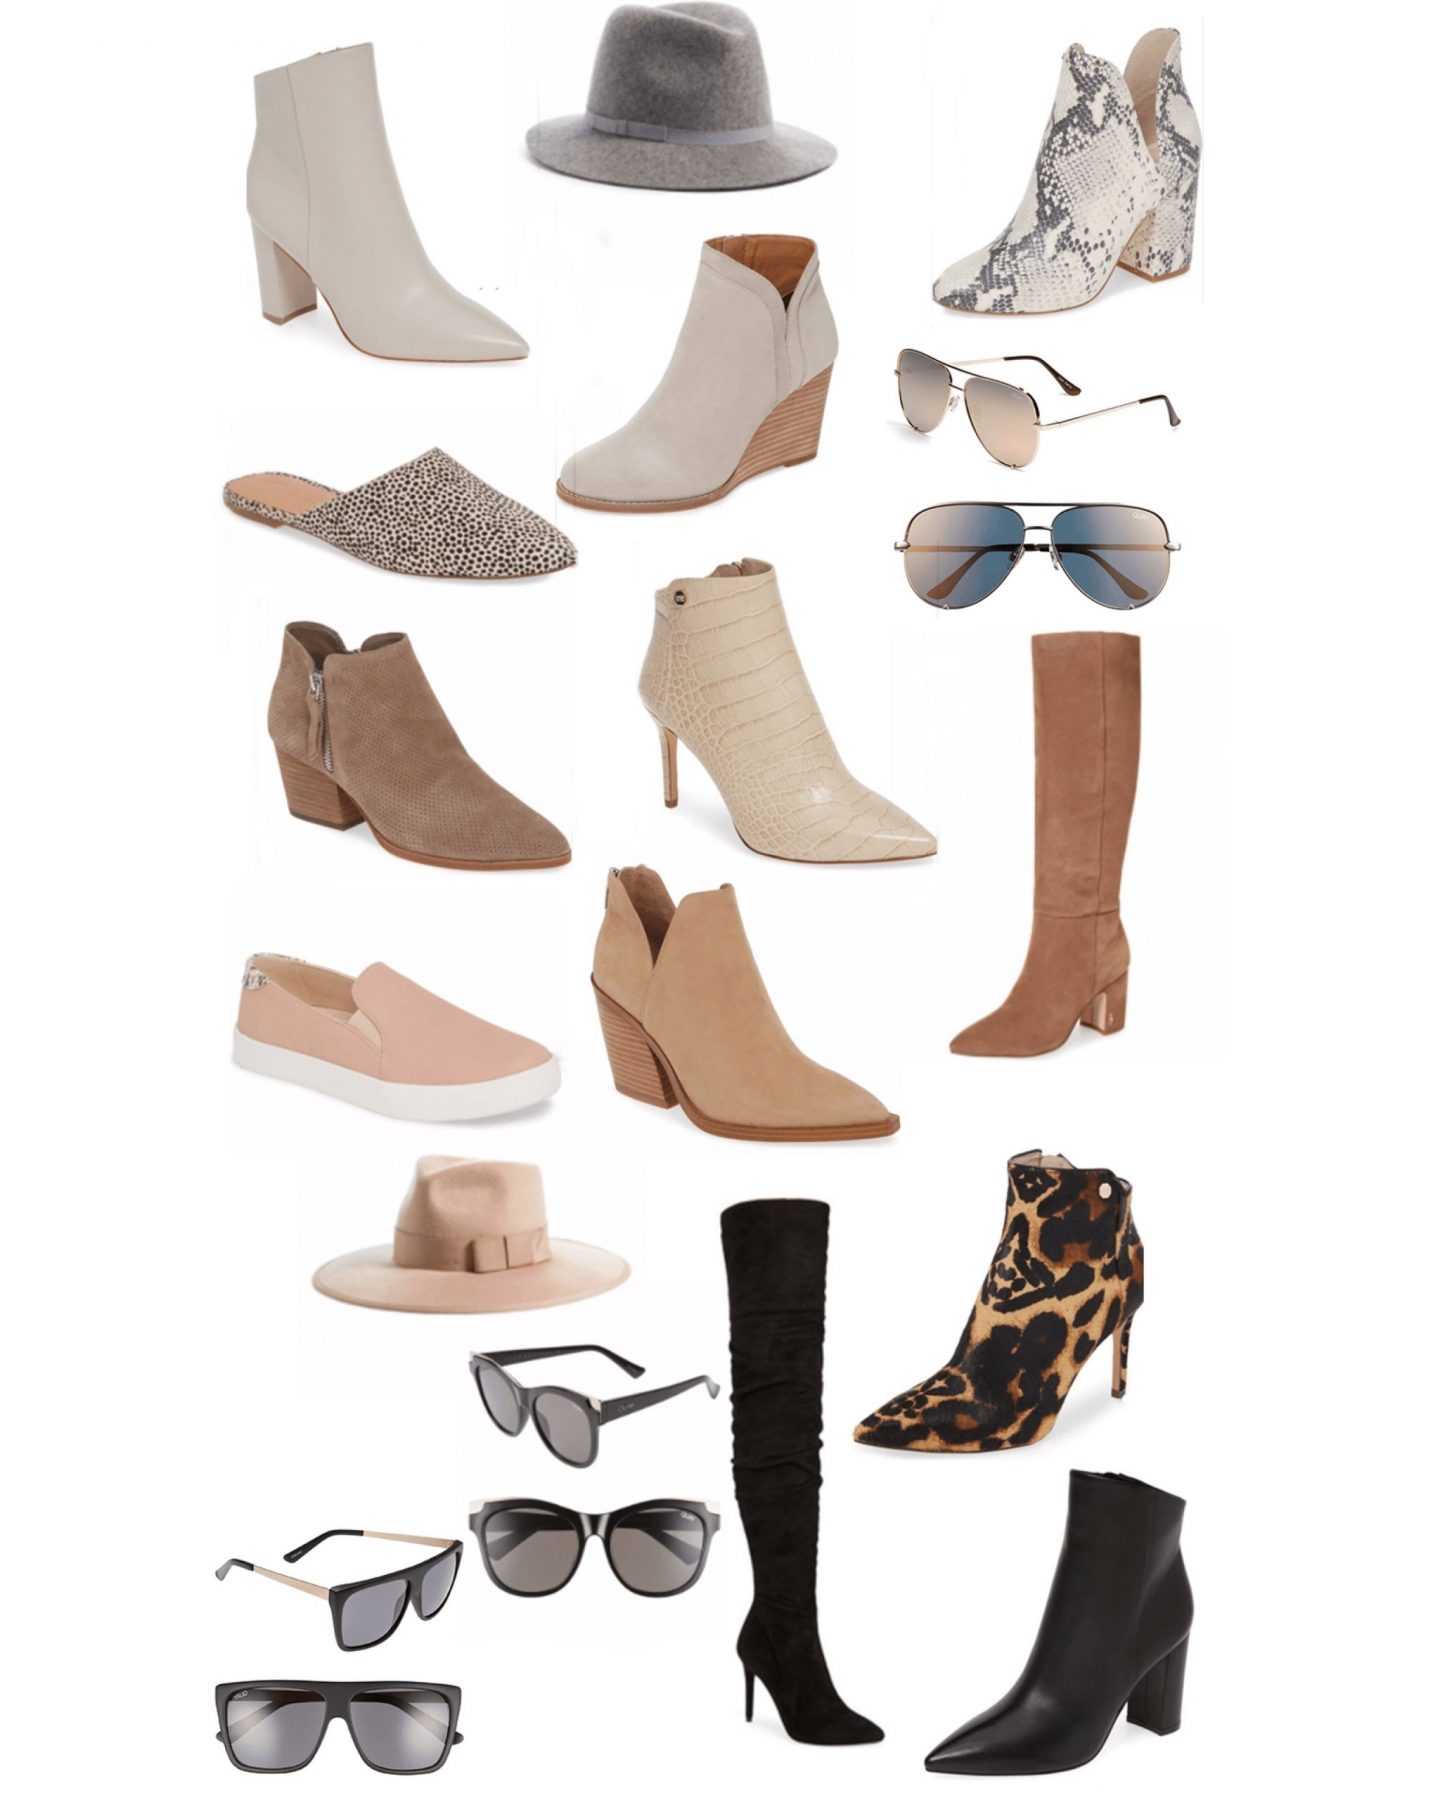 2019 Nordstrom Anniversary Sale Shoes & Accessories Top Picks 